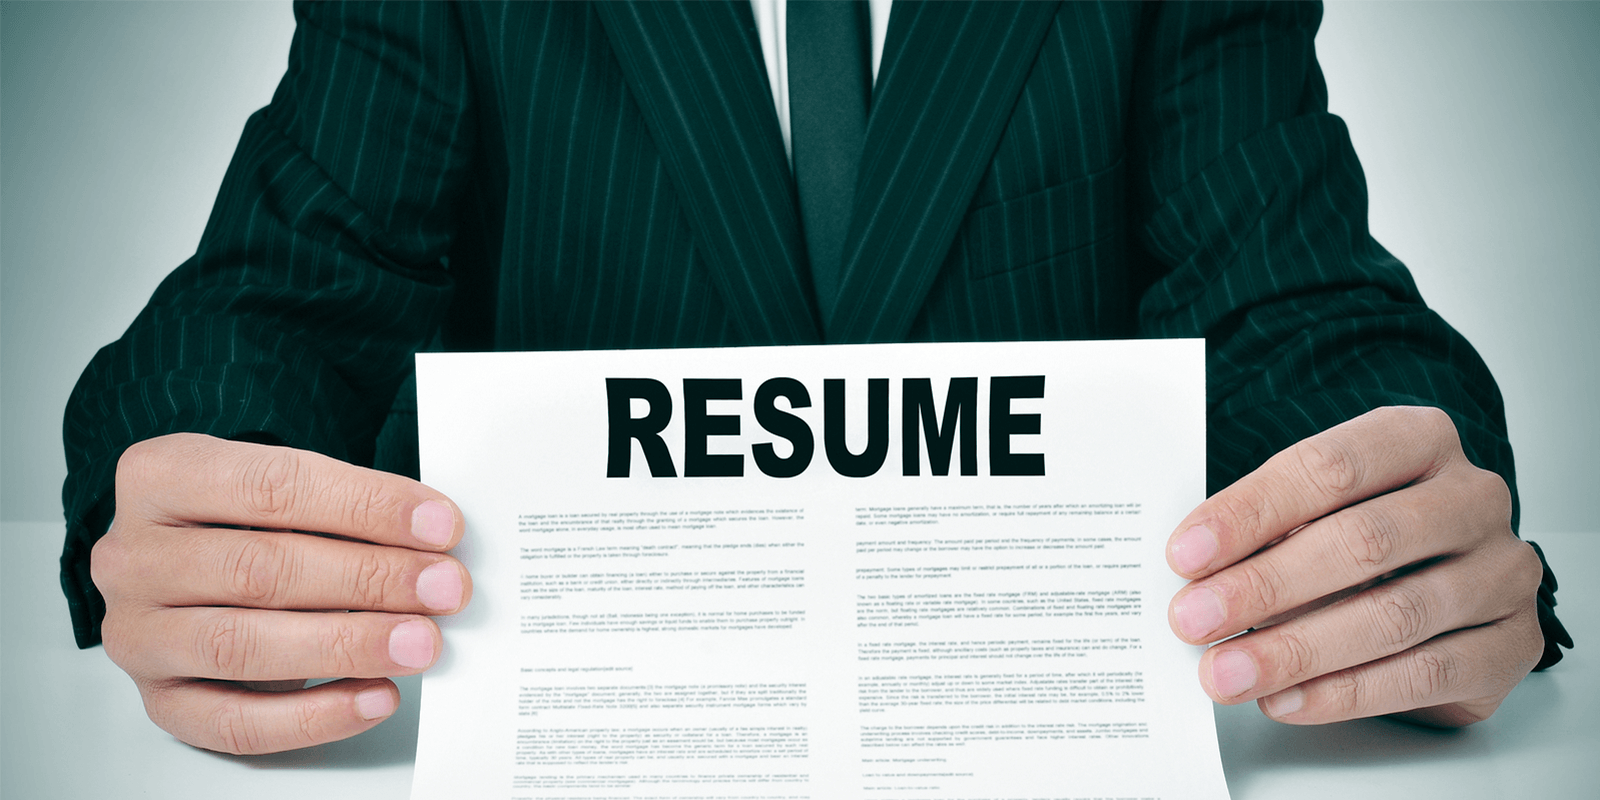 Exploring the Depths of the Job Market: Bengaluru CEO's Surprise at 3,000 Resumes in Just 48 Hours